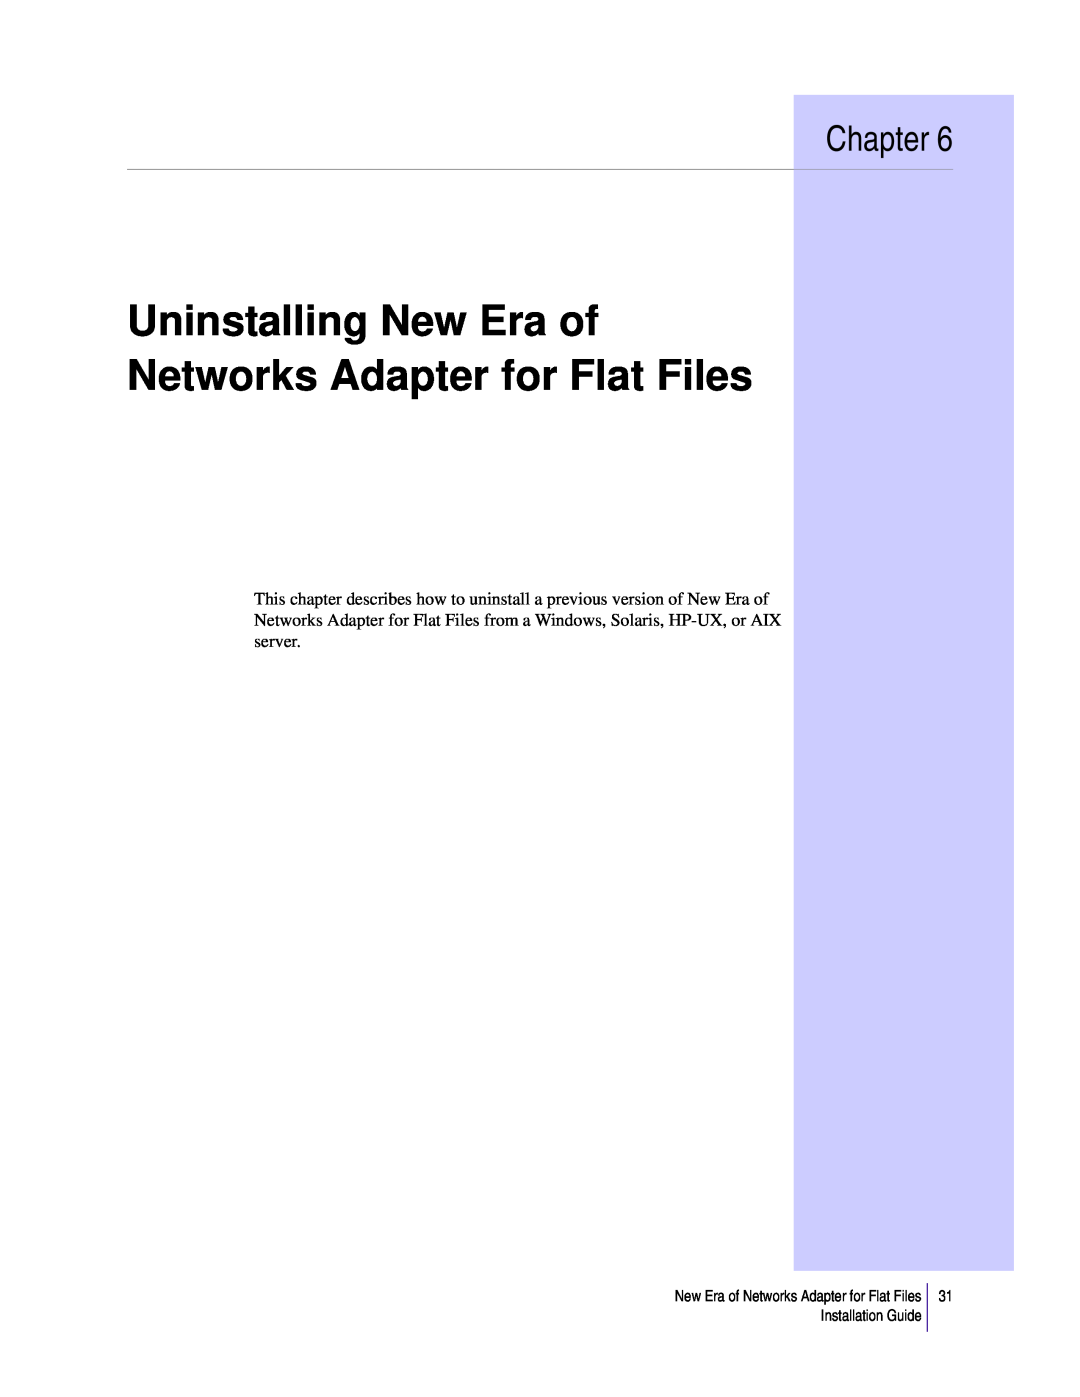 Sybase 3.8 manual Uninstalling New Era of Networks Adapter for Flat Files, Chapter 